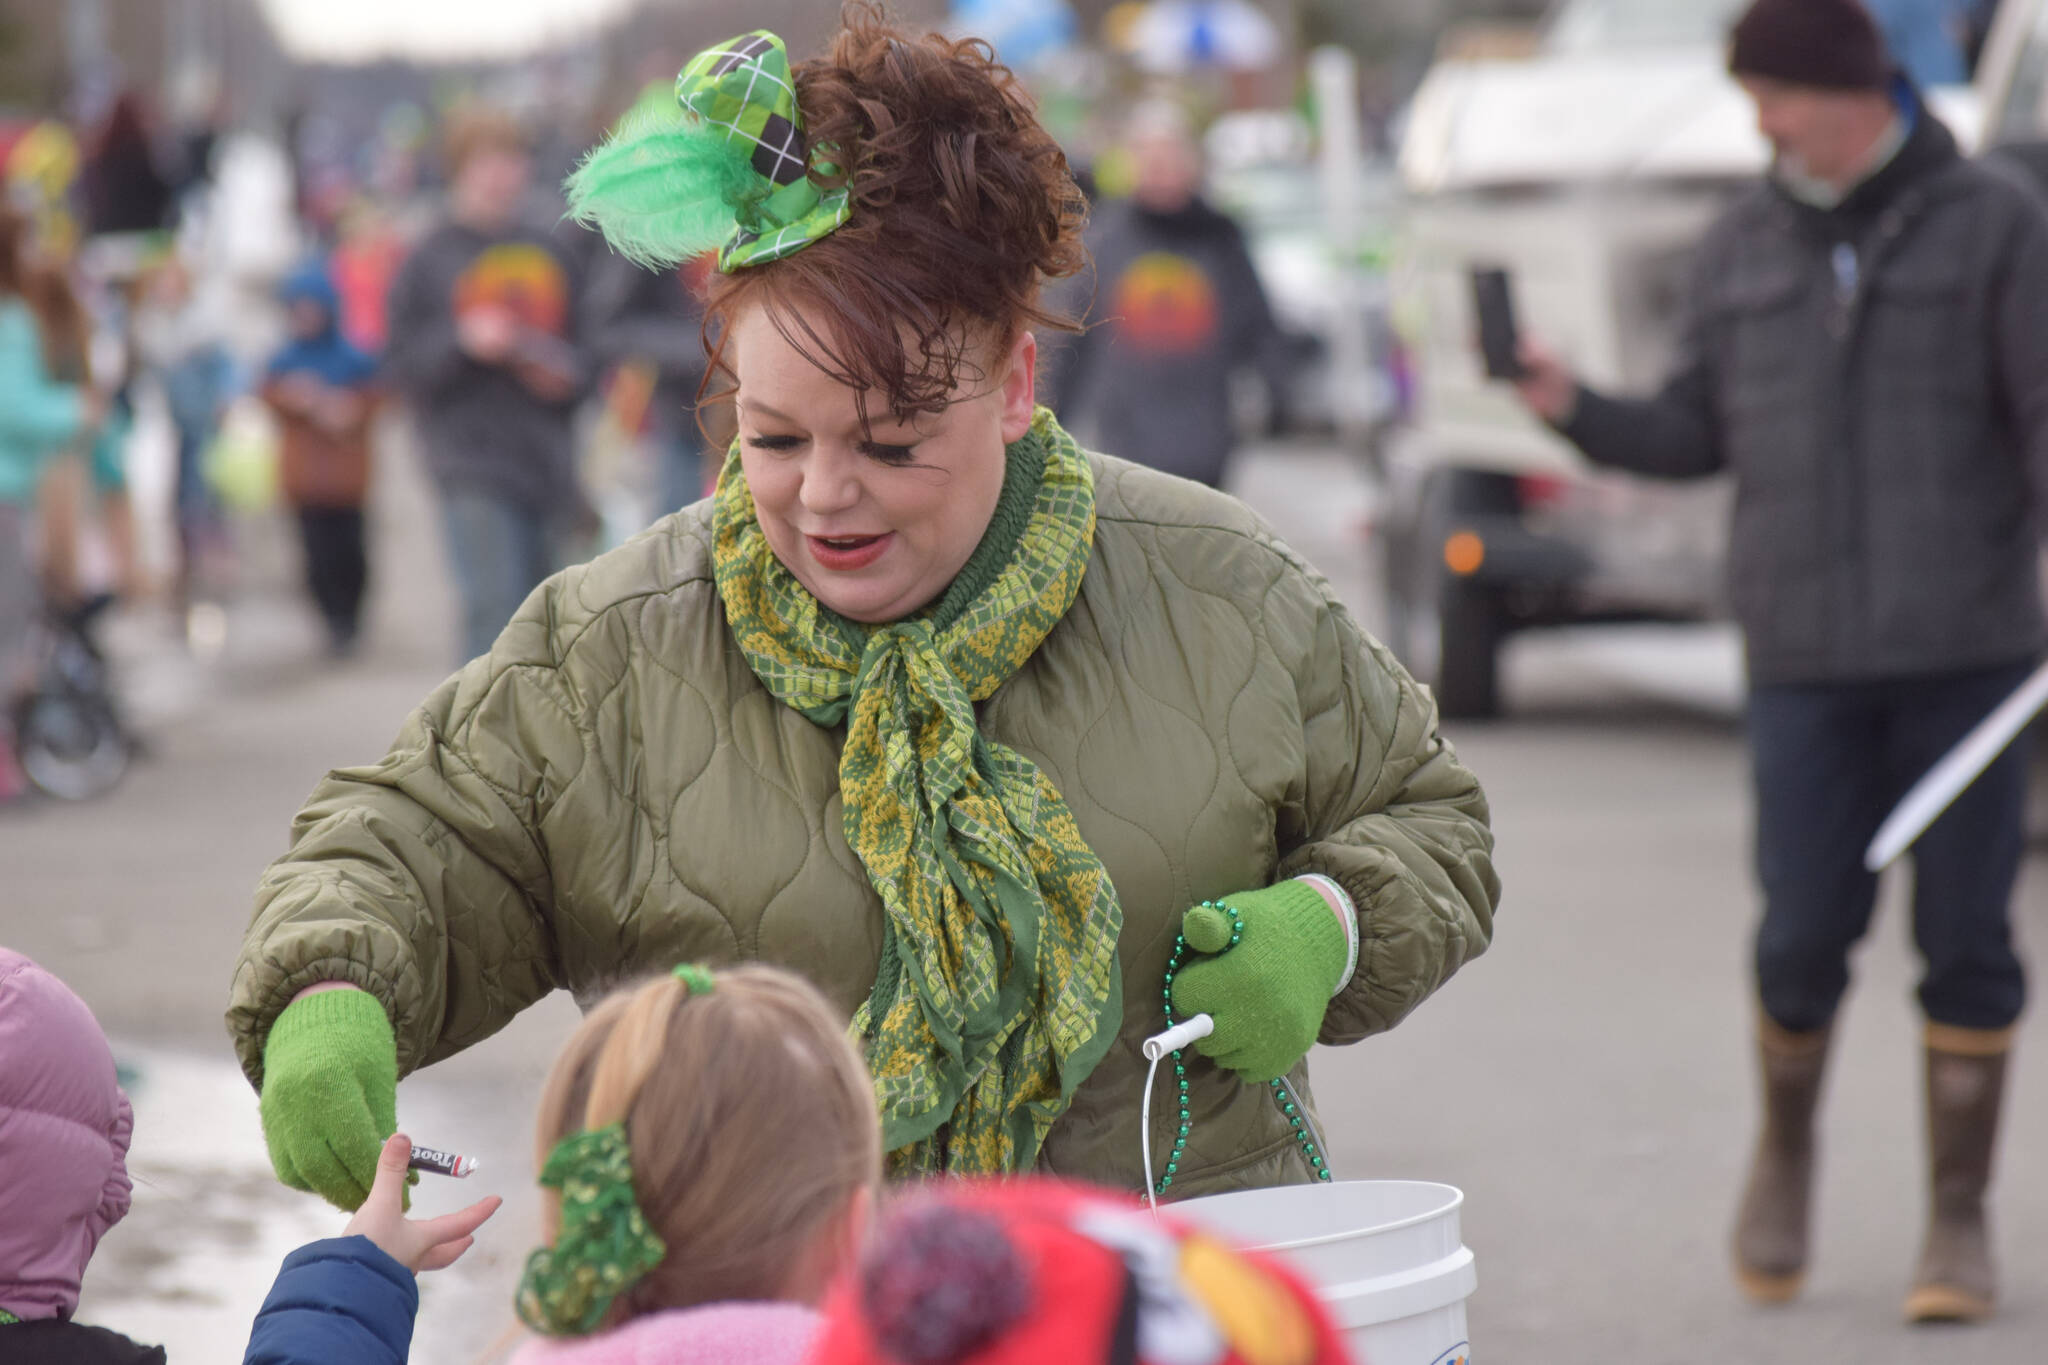 Shanon Davis, the executive director of the Soldotna Chamber of Commerce, hands out candy during the Sweeny’s St. Patrick’s Parade in Soldotna on March 17, 2022. (Camille Botello/Peninsula Clarion)